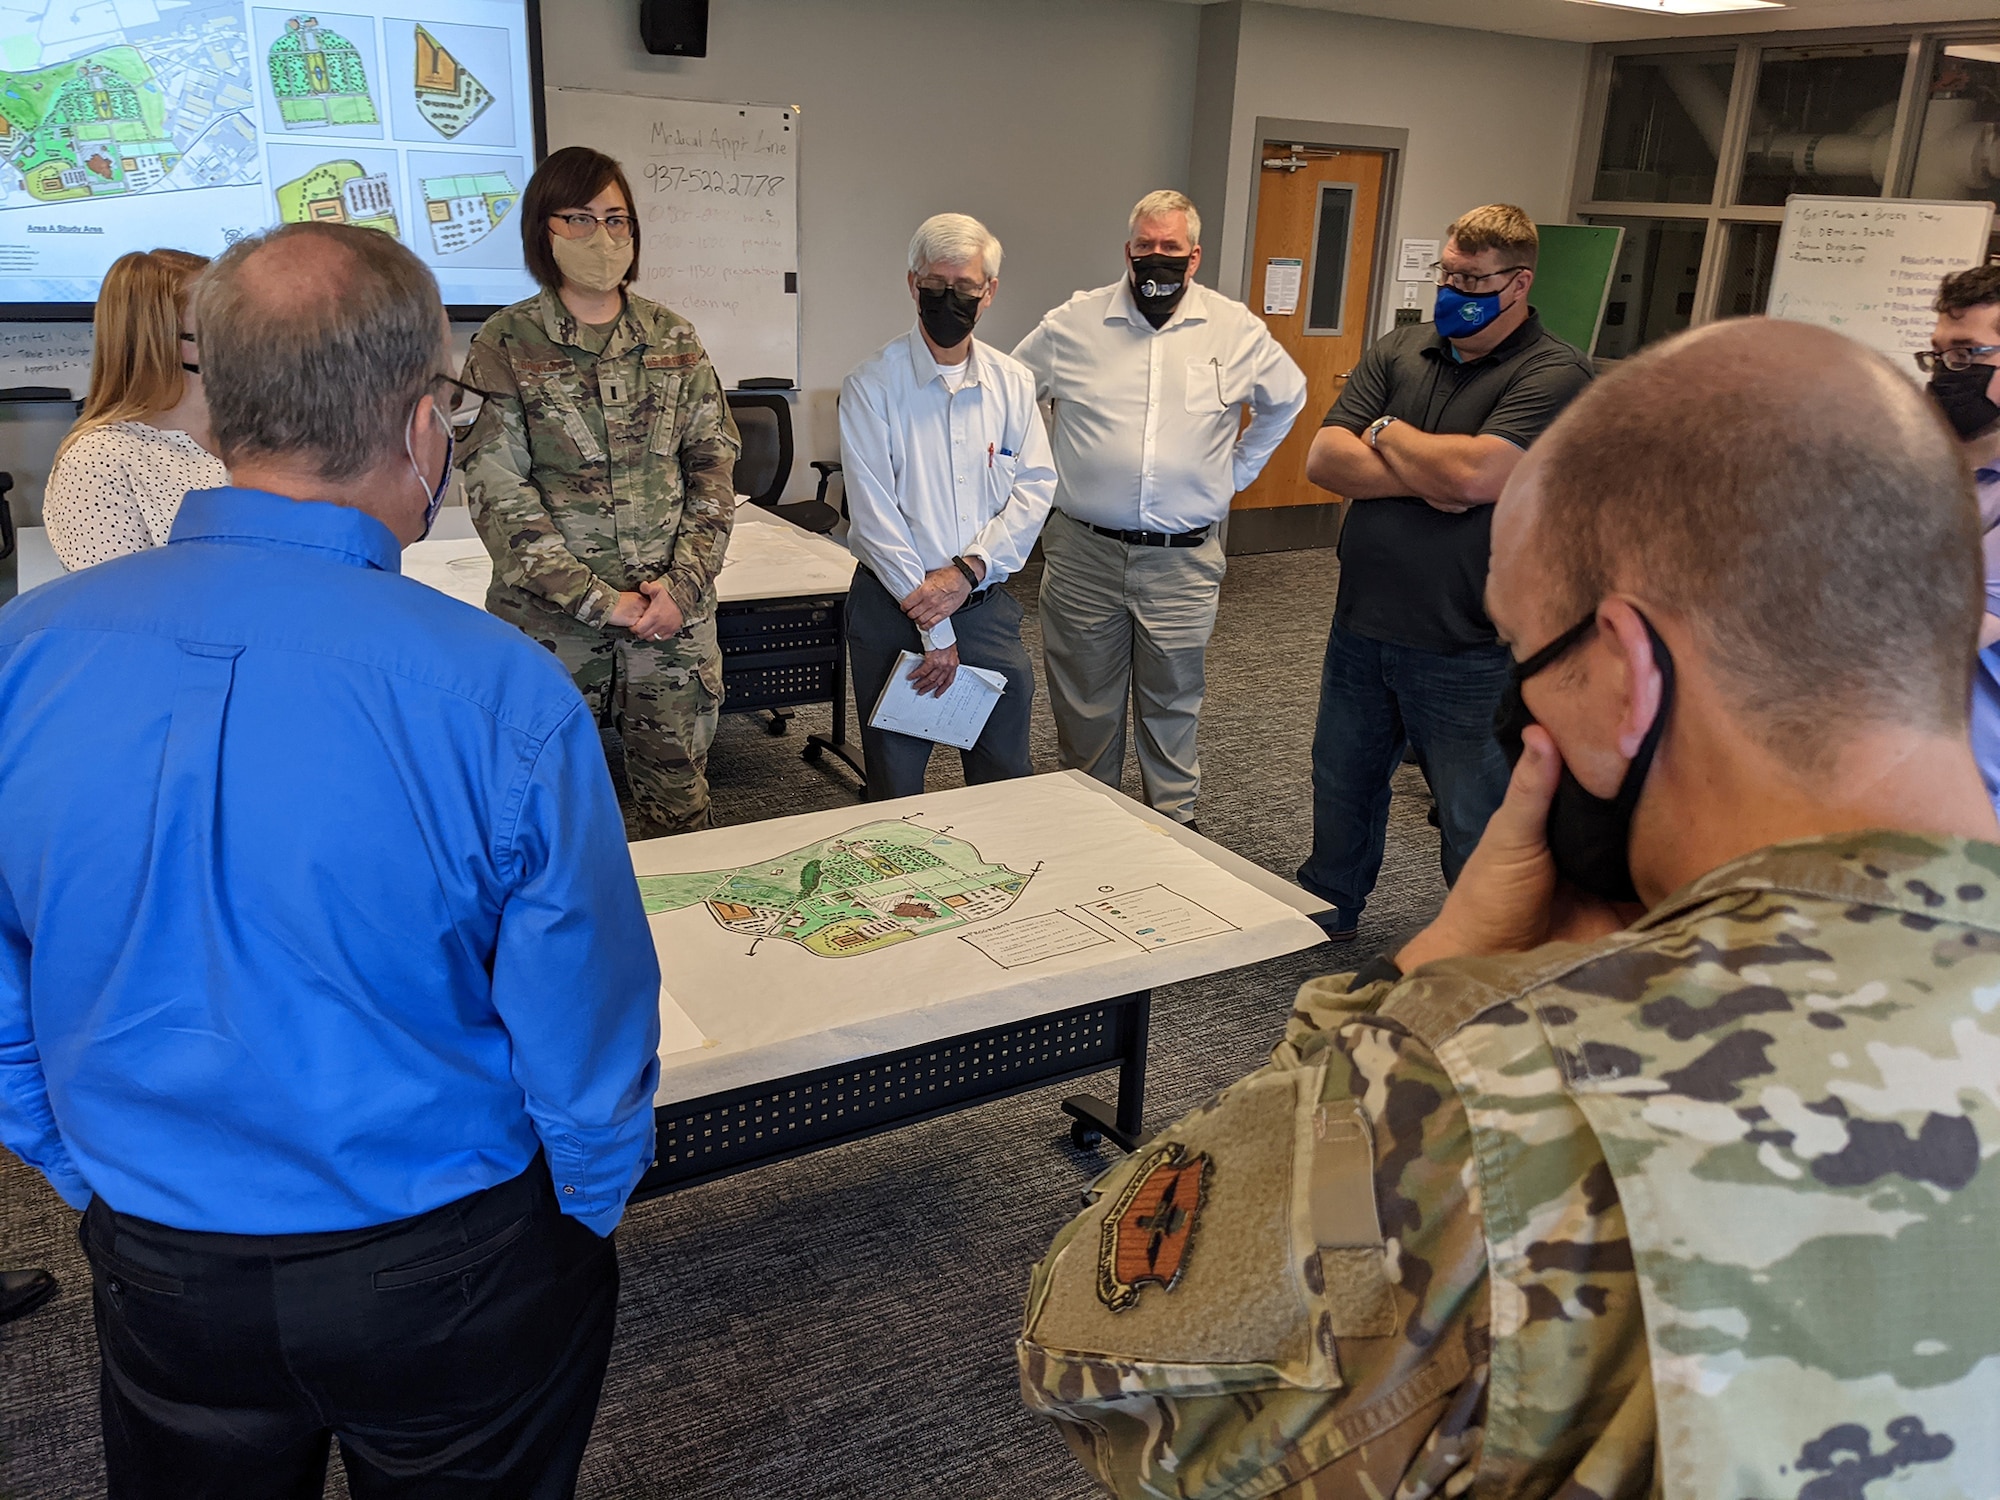 Students in the Air Force Institute of Technology Civil Engineer School’s comprehensive planning development (WENG 520) course work in teams to develop district plans for areas around Wright-Patterson AFB and then present their work to base personnel and leadership. (Contributed Photo)